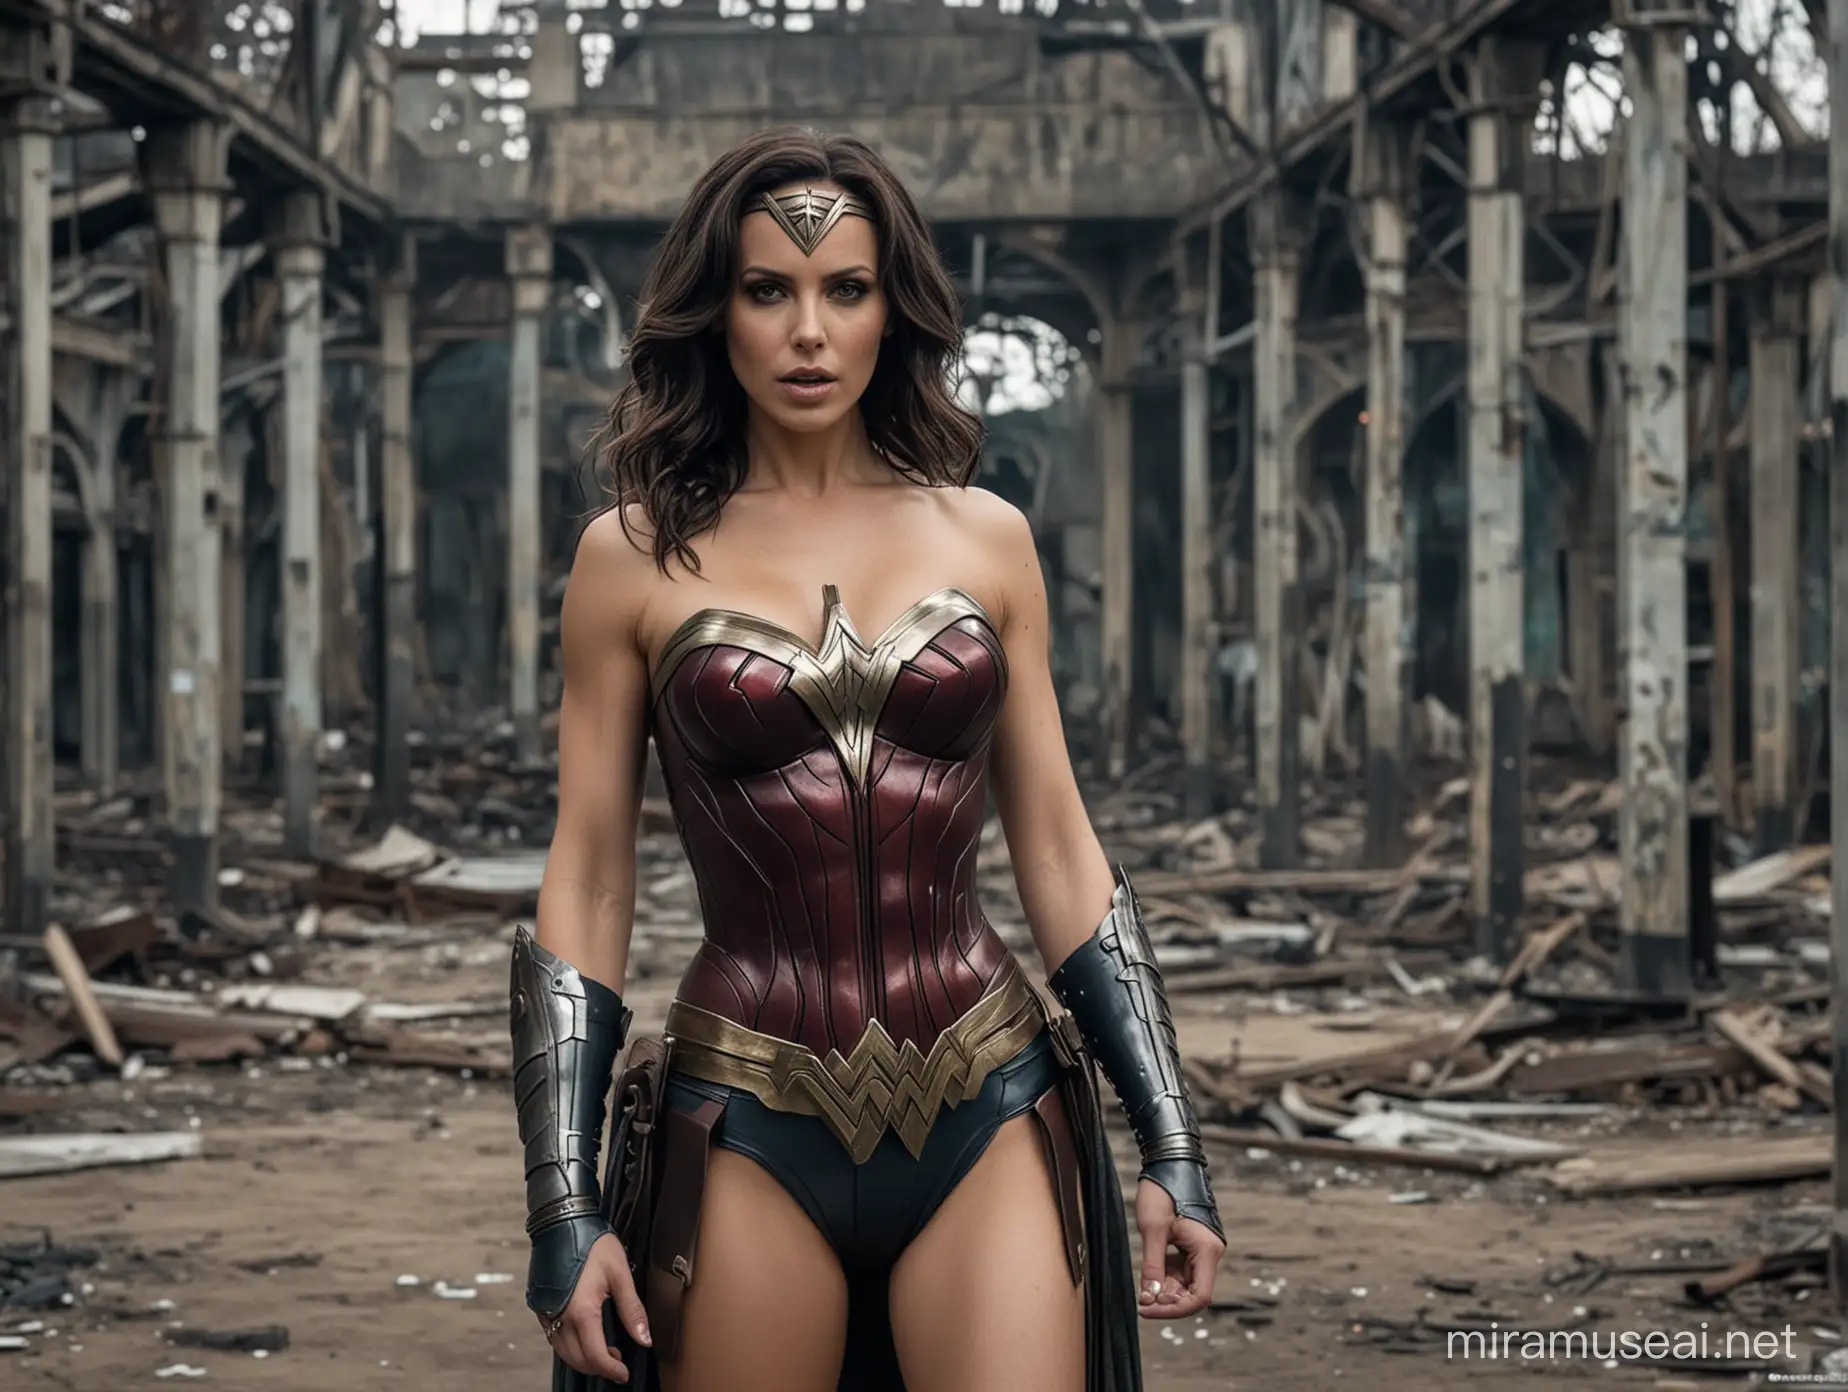 Kate Beckinsale Gothic Wonder Woman Topless in Abandoned Amusement Park